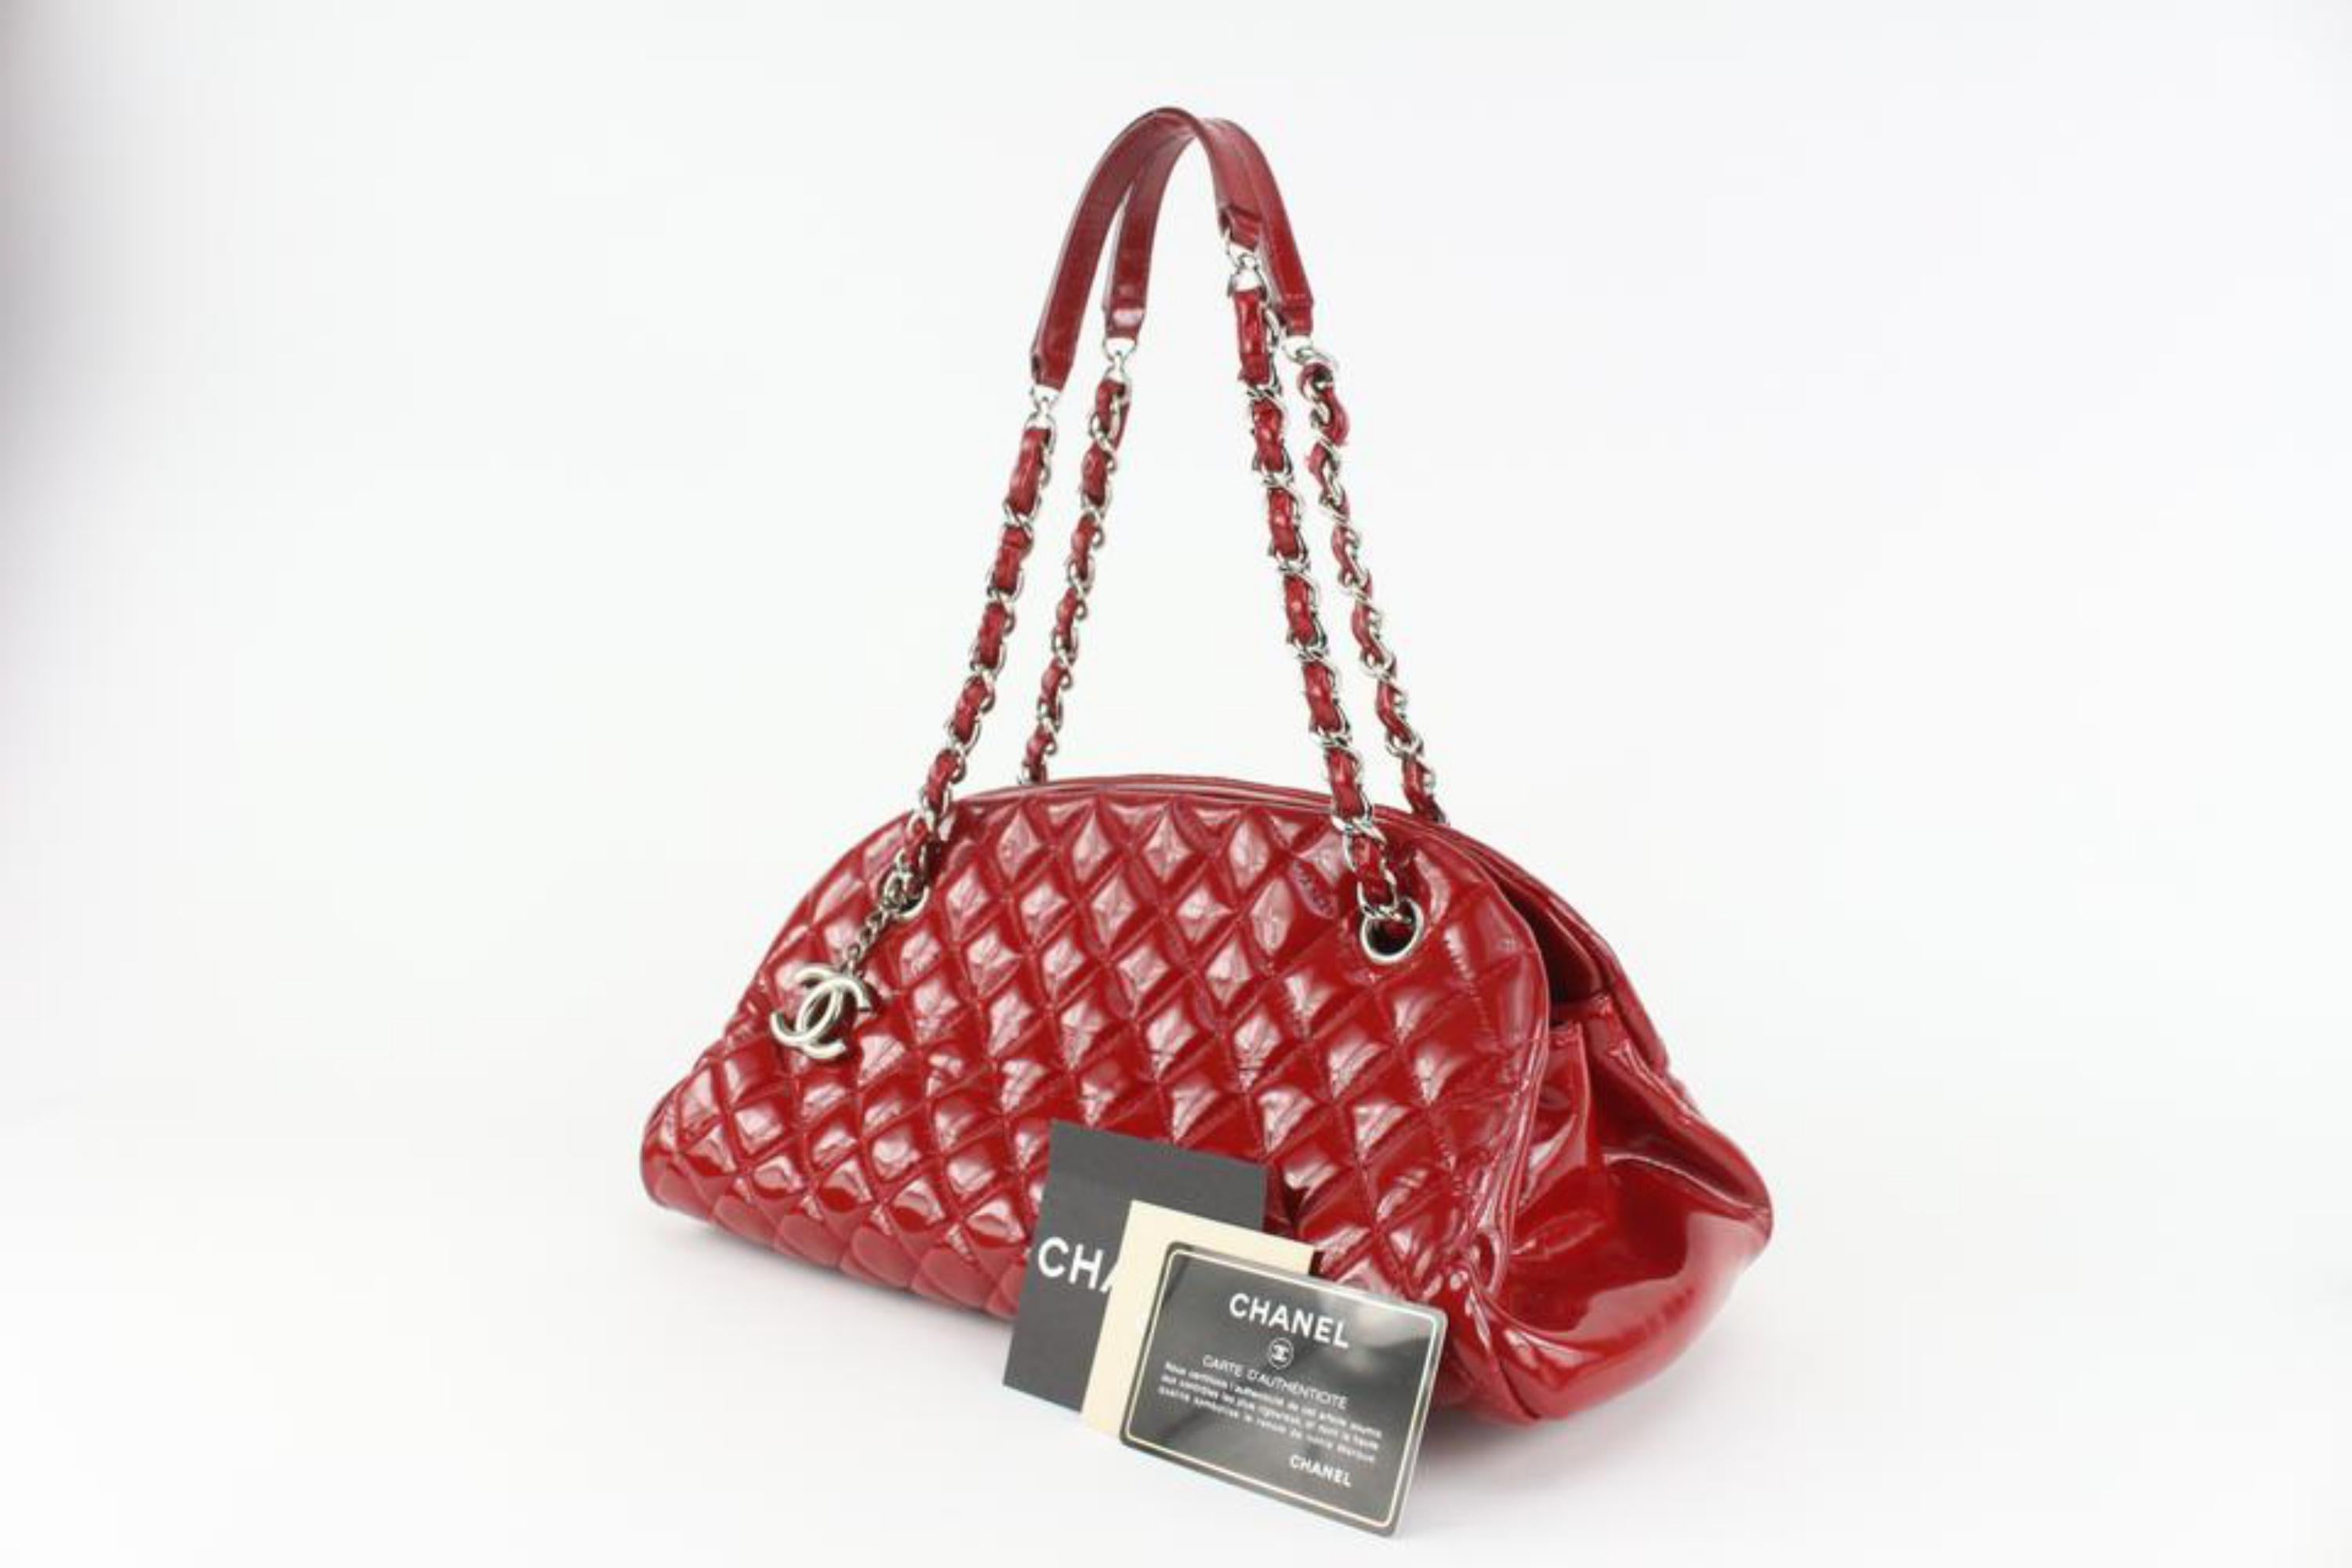 Chanel Red Quilted Patent Bowling Chain Bag 1123c28
Date Code/Serial Number: 15233505
Made In: Italy
Measurements: Length:  13